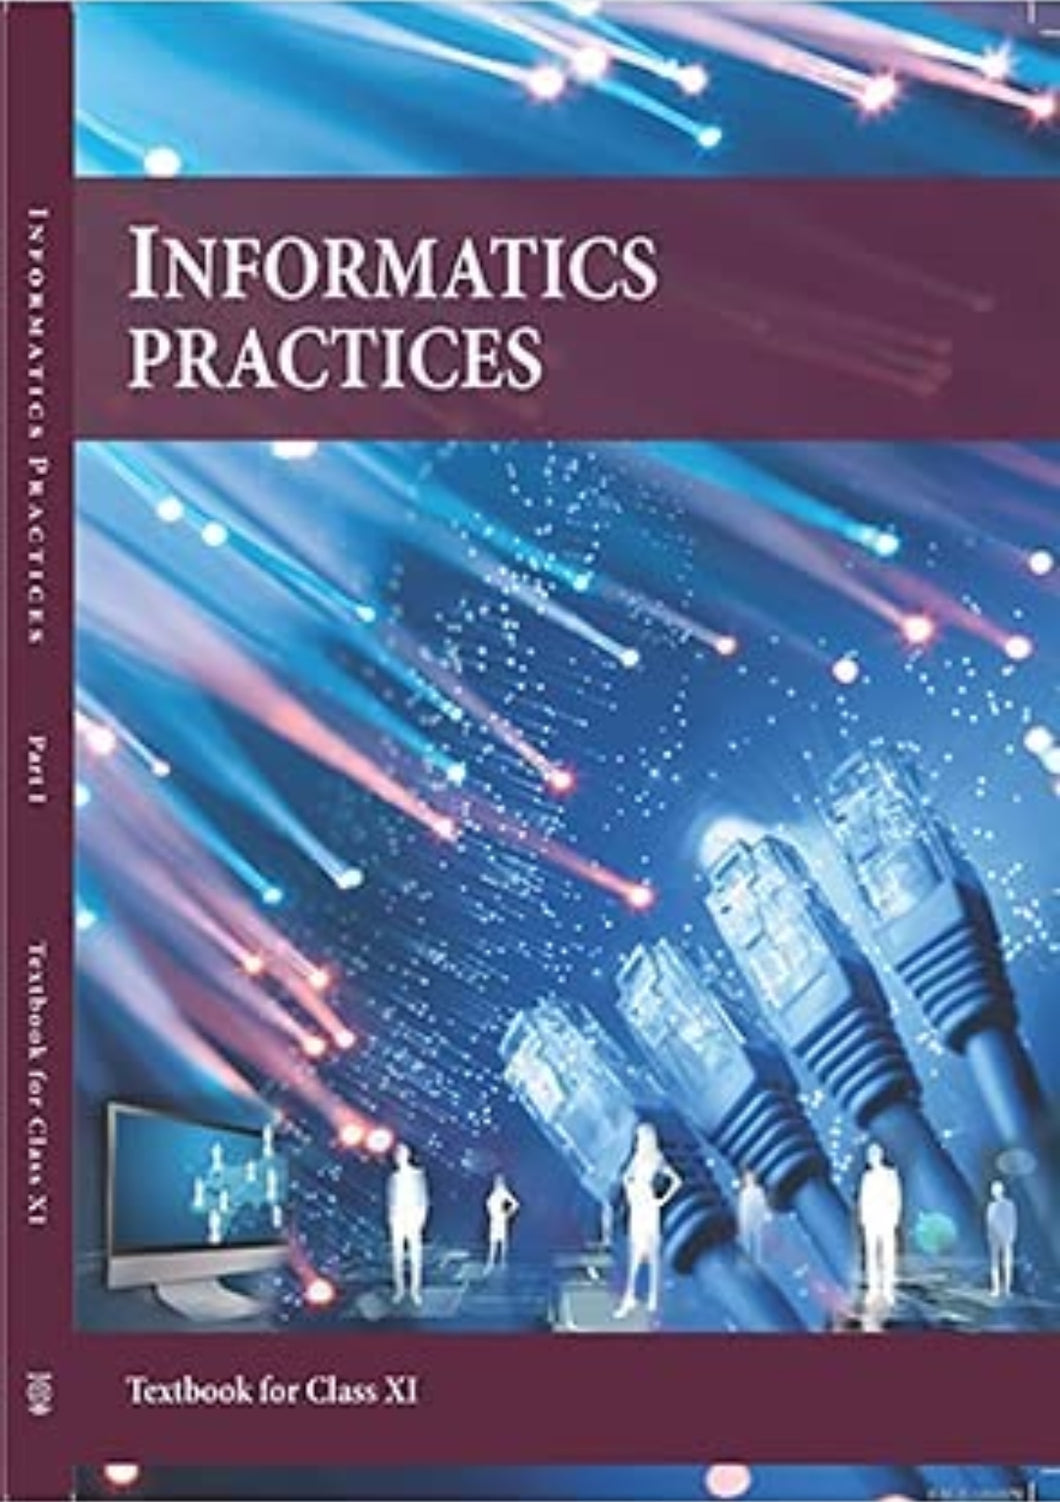 NCERT Informatics Practices for Class 11 - latest edition as per NCERT/CBSE - Booksfy